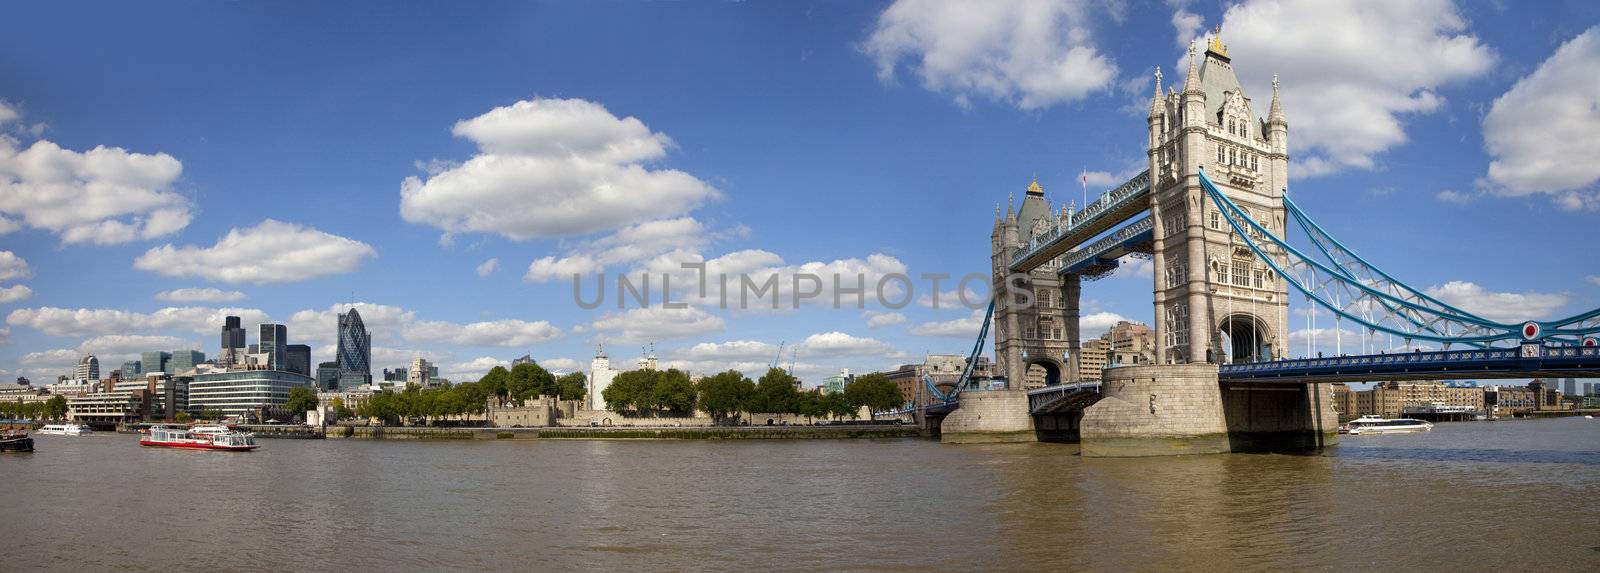 A panoramic view overlooking sights including Tower Bridge, the Tower of London and the Gherkin.